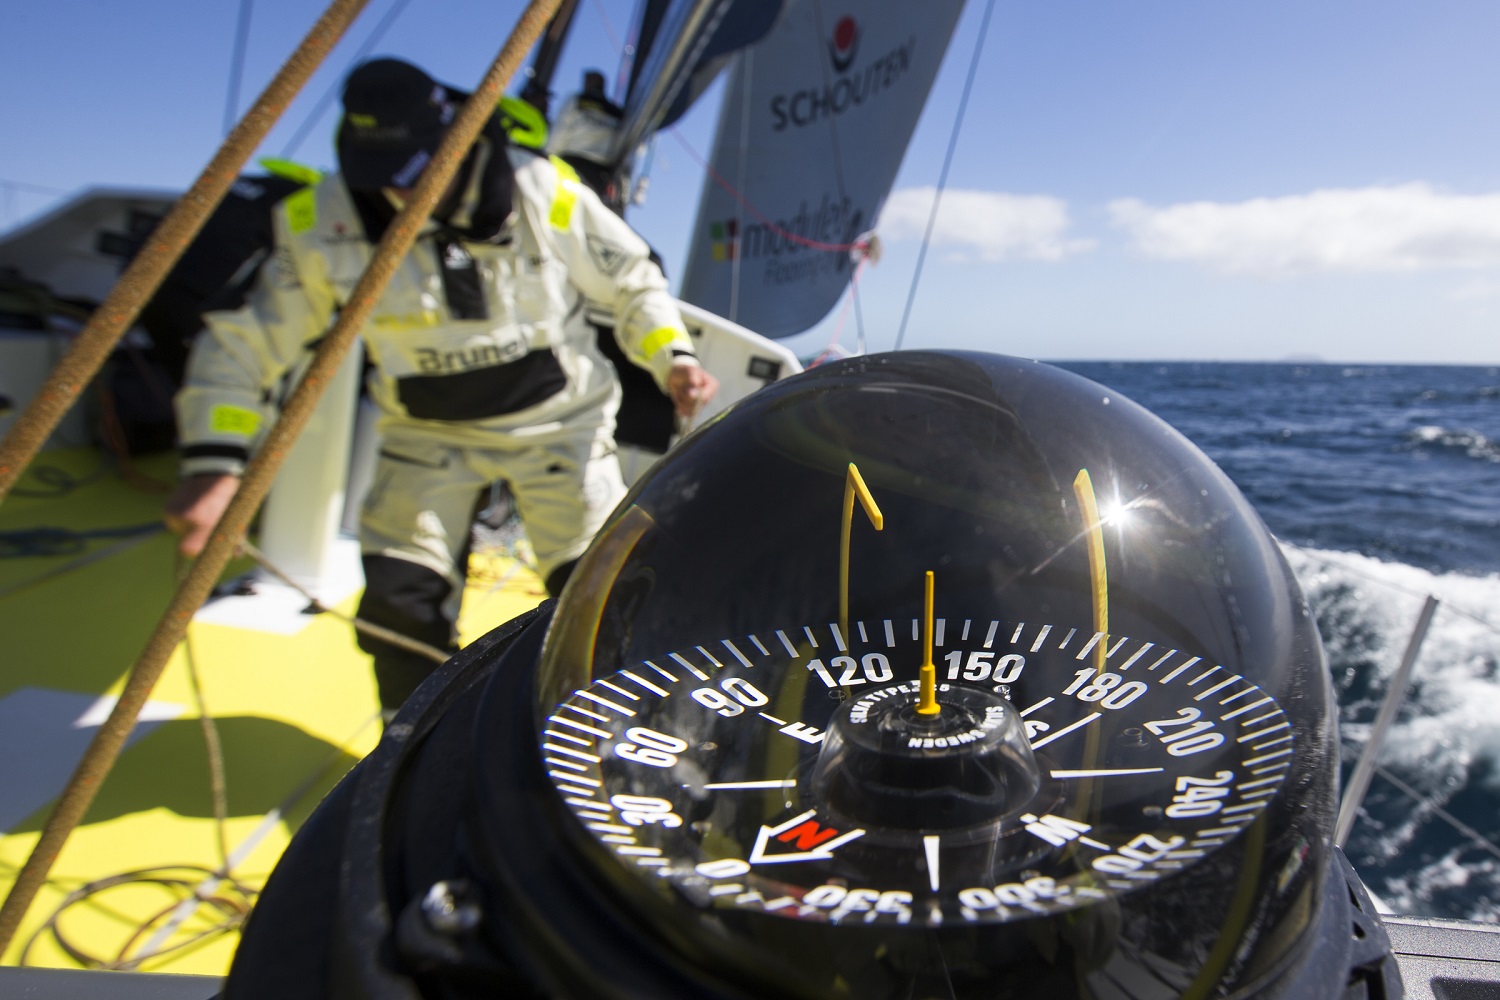 Team Brunel training, 1st of March 2014, Lanzarote, Spain